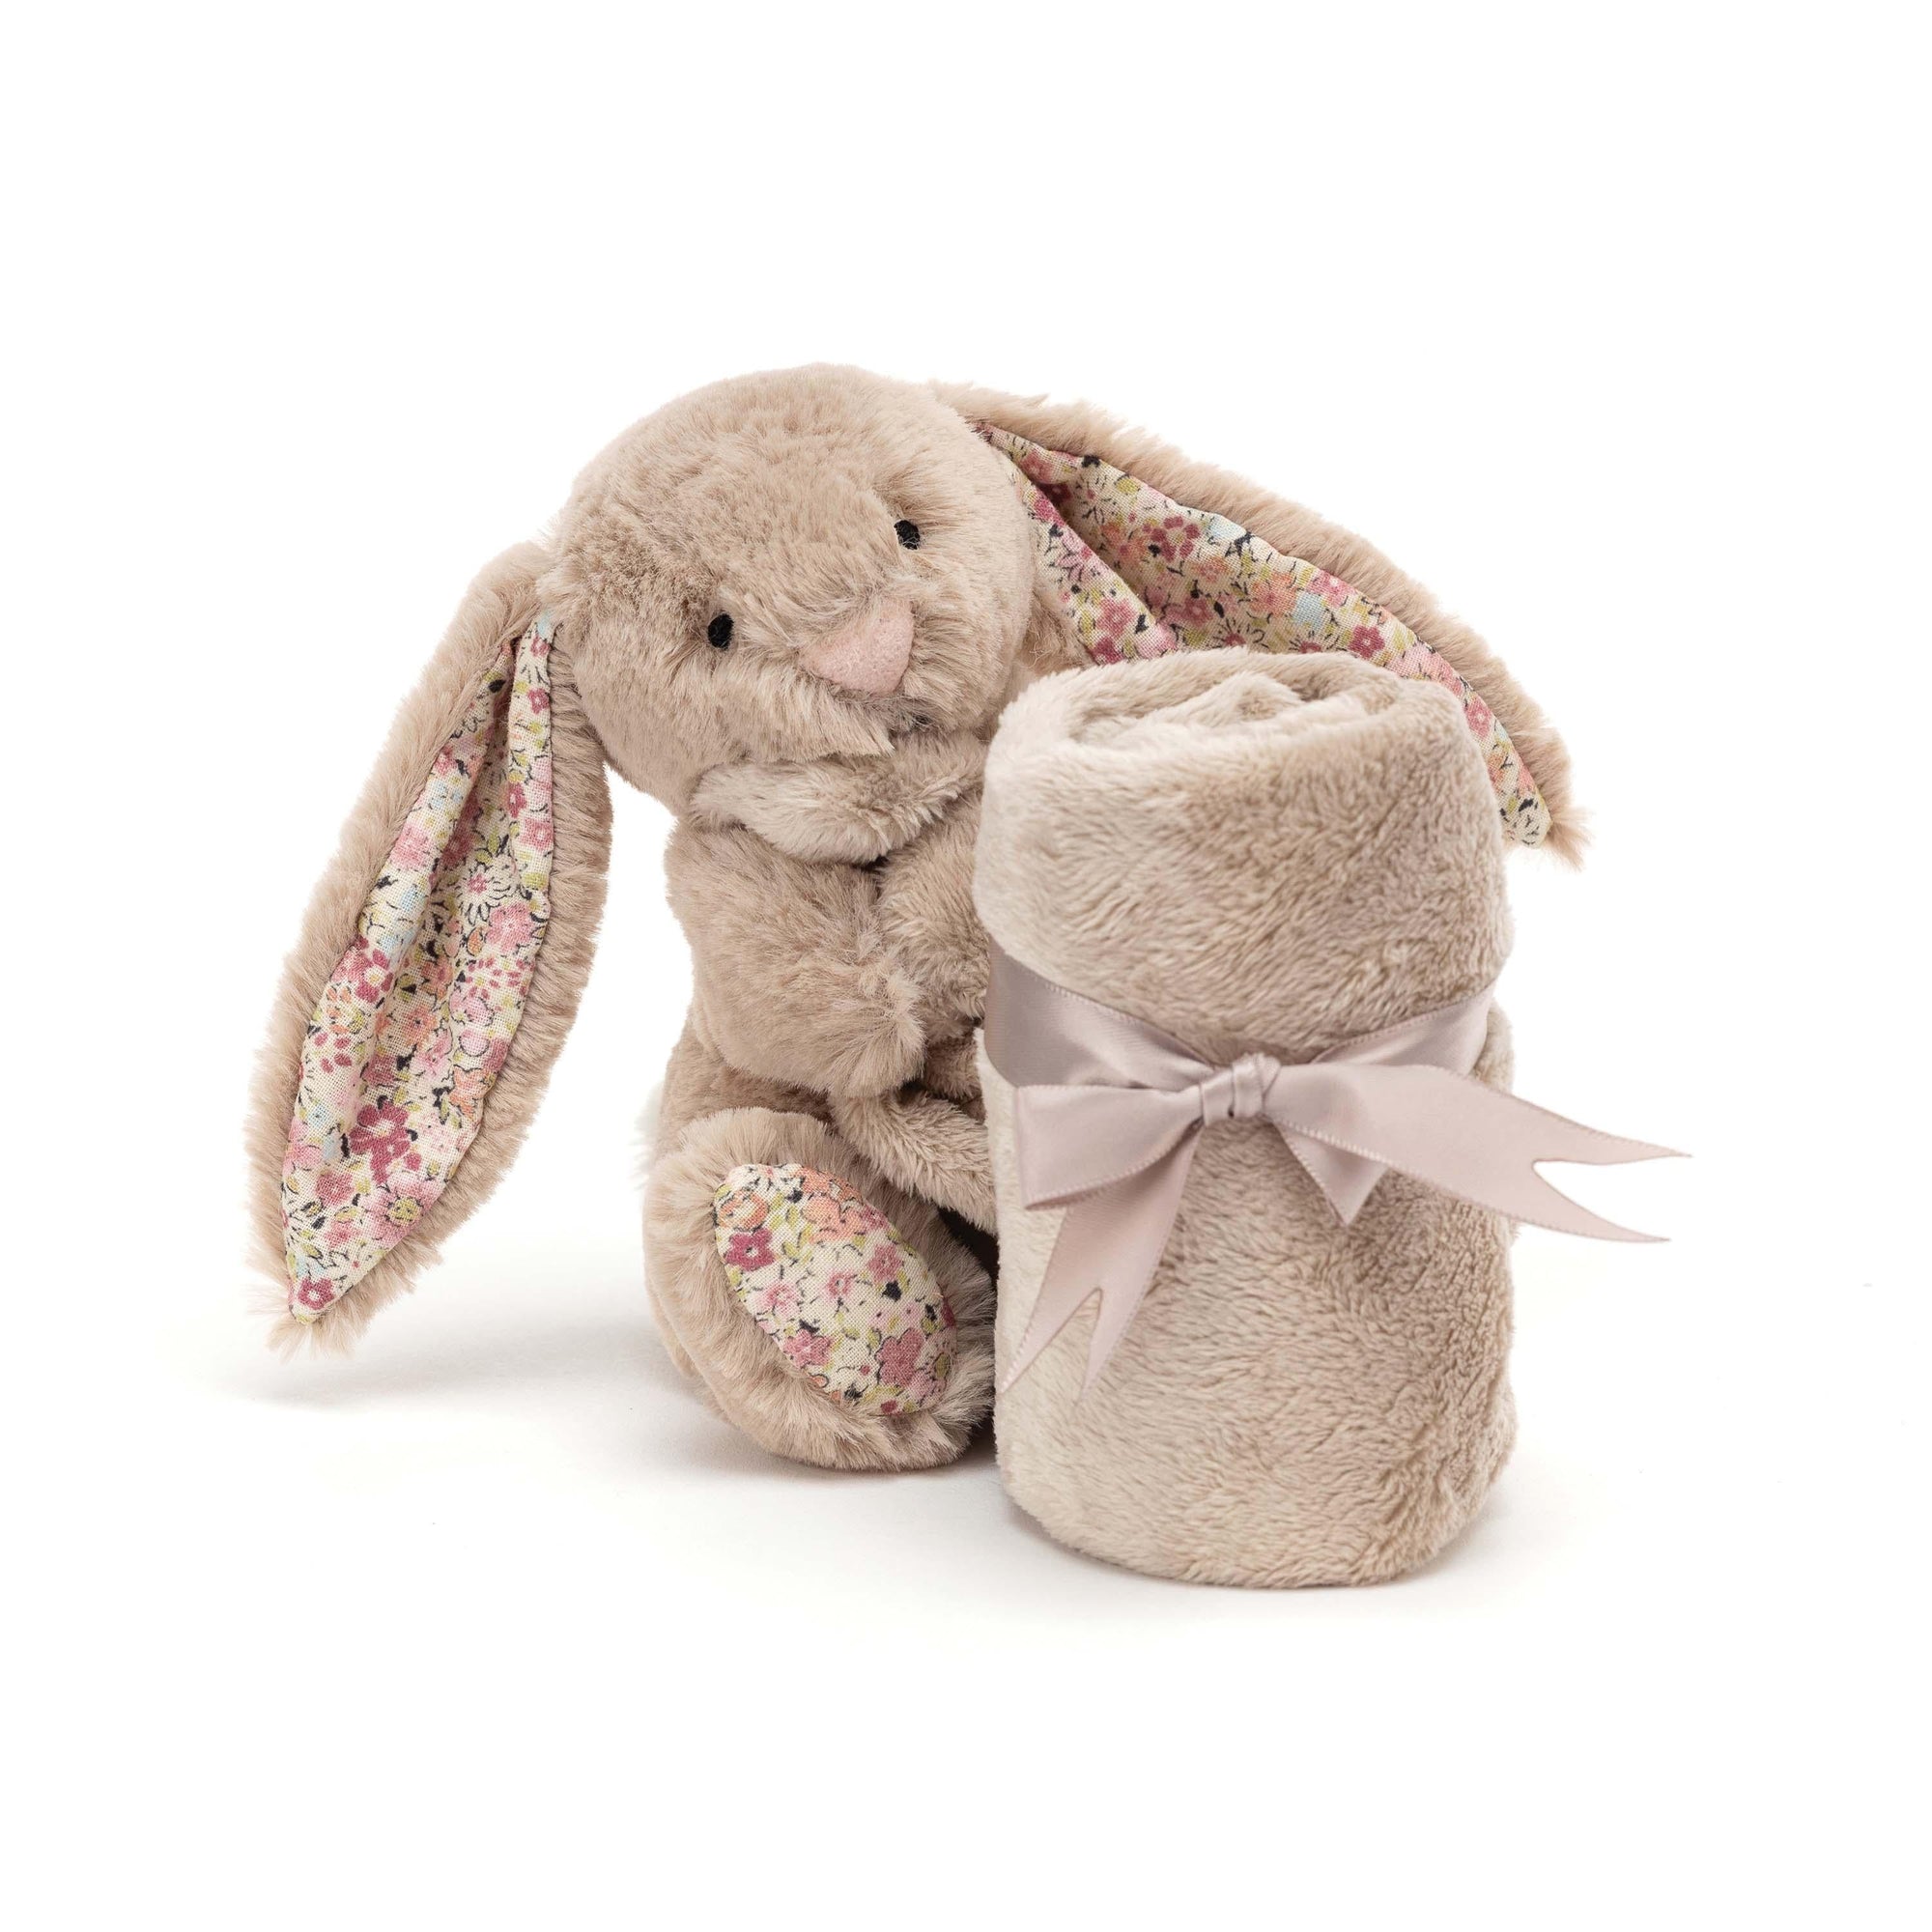 Jellycat Blossom Bea Beige Bashful Bunny Soother - Soft toy - Independent studios